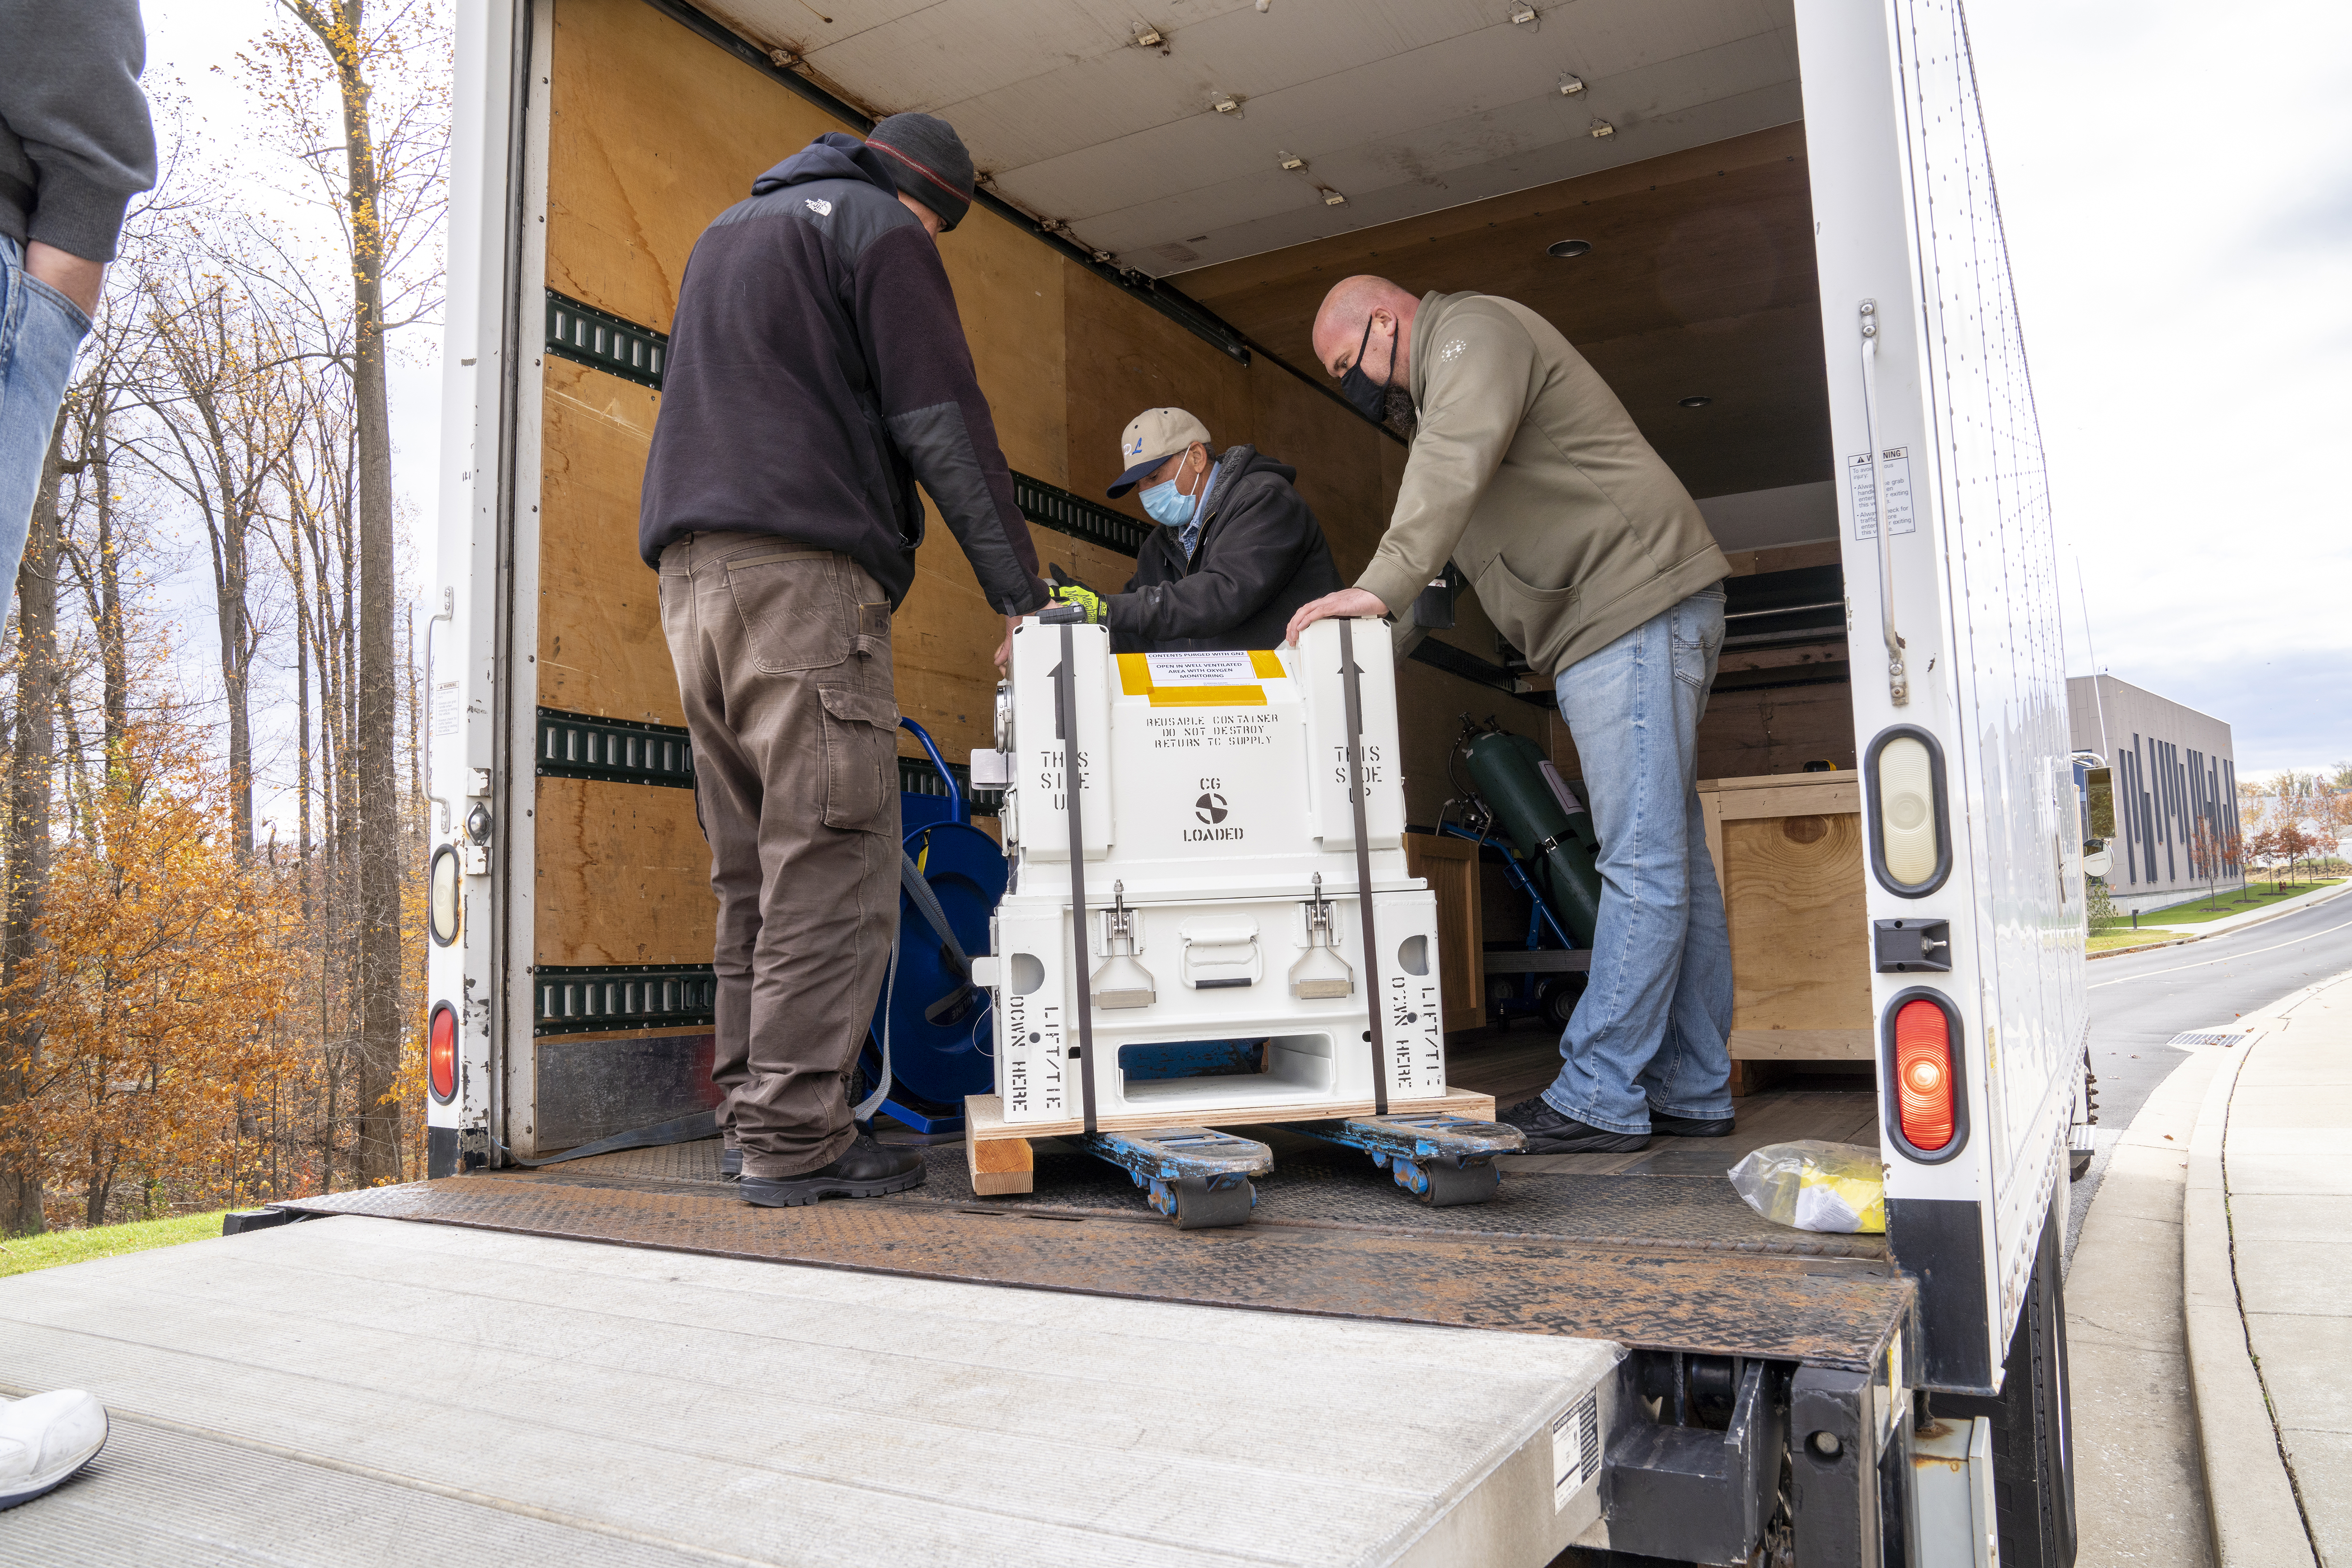 MISE team members place the container in a shipping truck